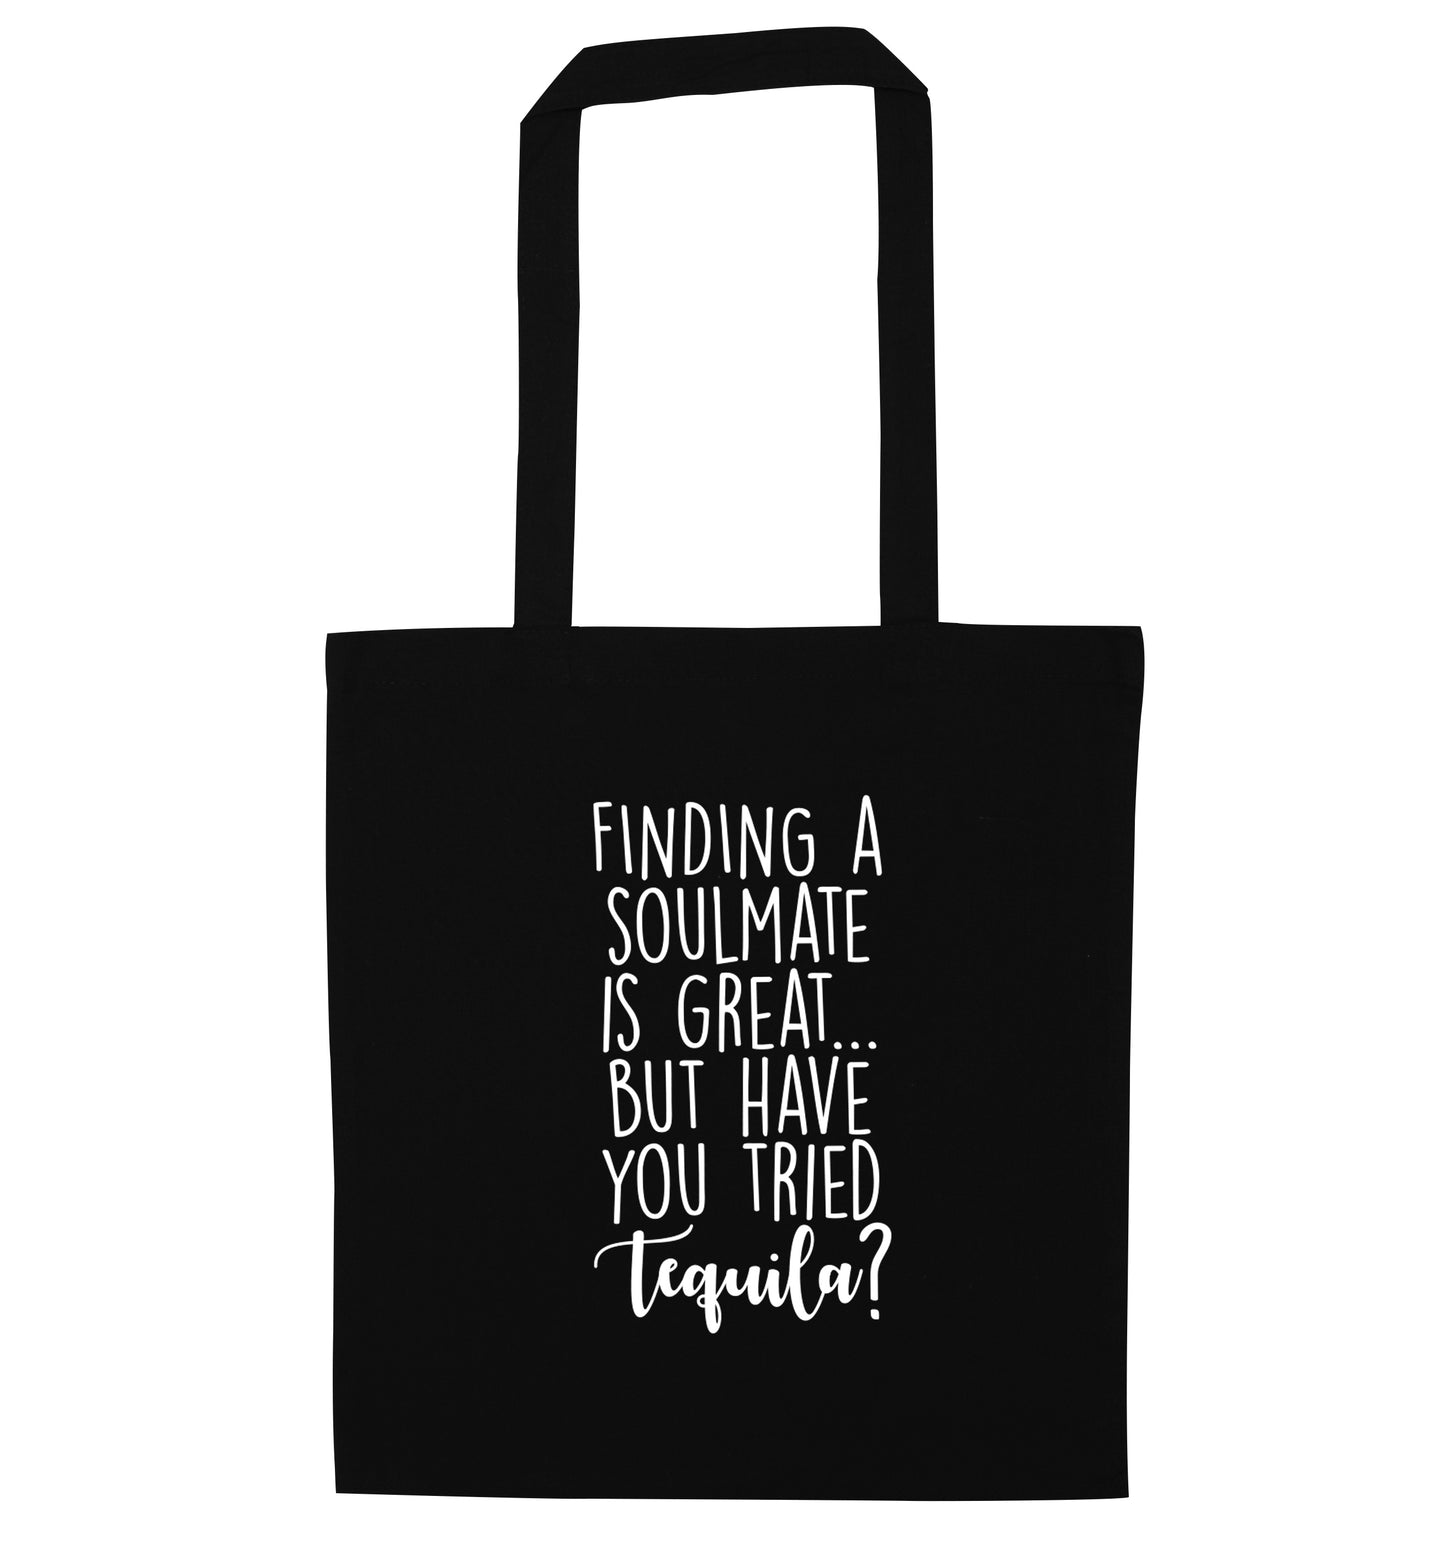 Finding a soulmate is great but have you tried tequila? black tote bag